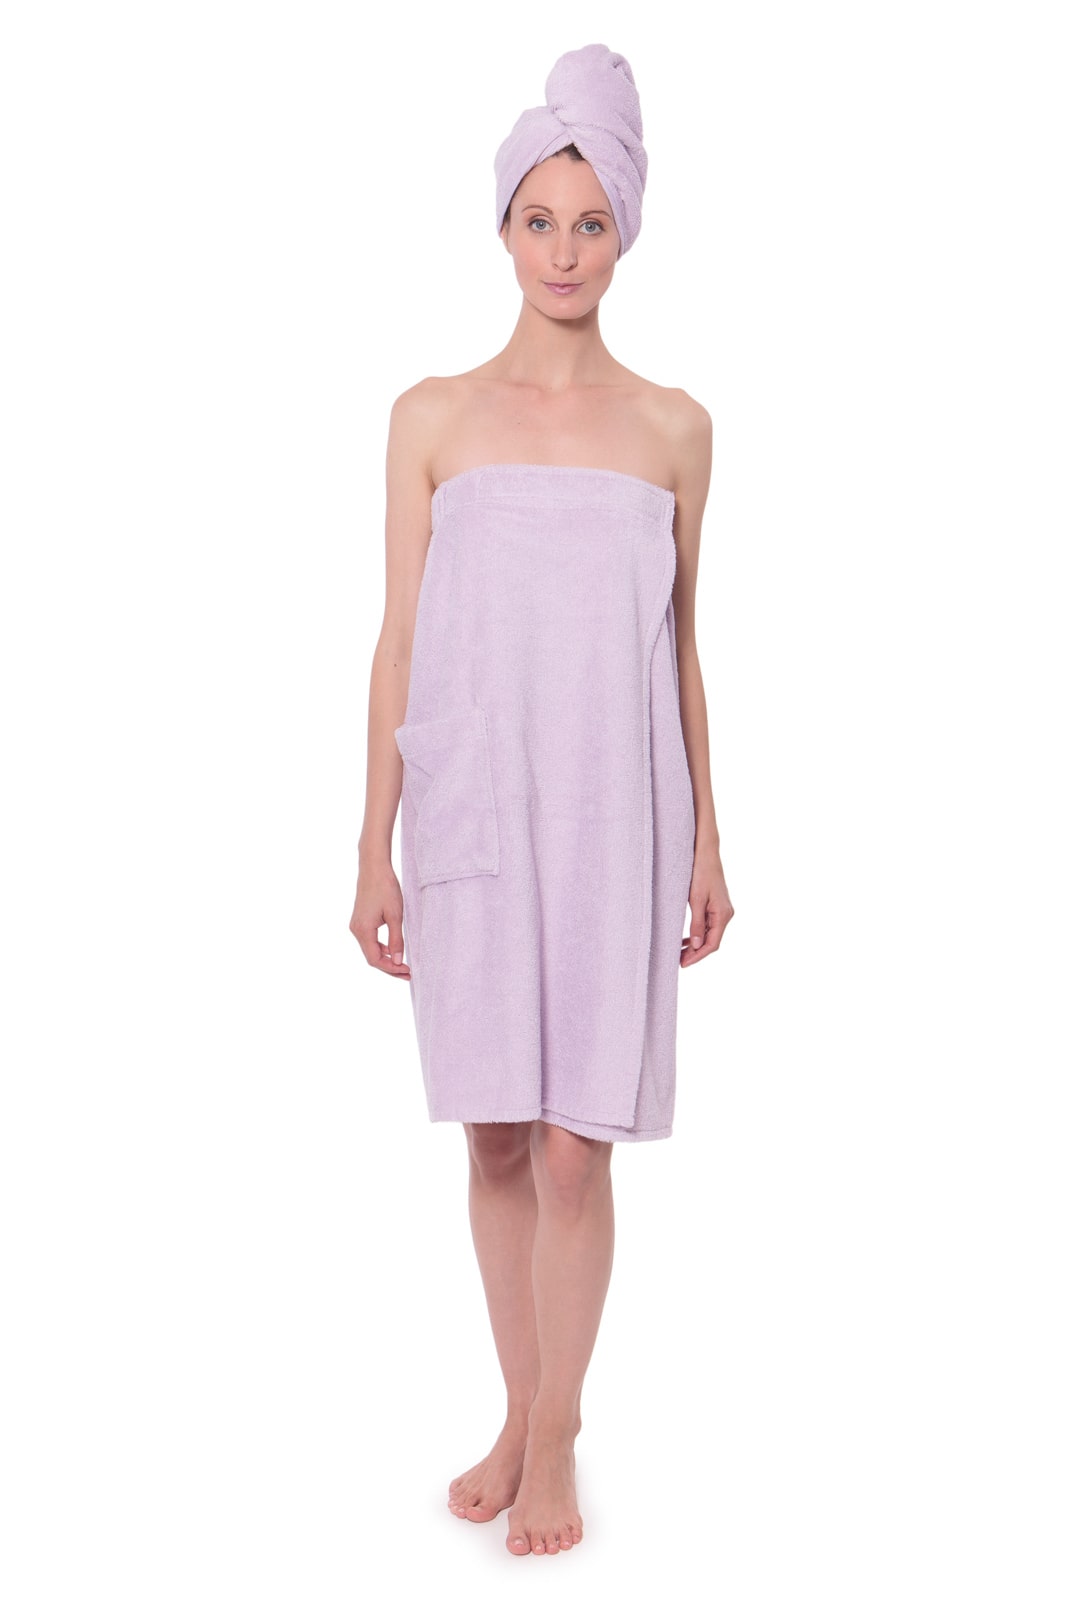 Texere Women's 2pc Terry Cloth Body and Hair Wrap Womens>Spa>Set Fishers Finery Lavender Fog S/M 